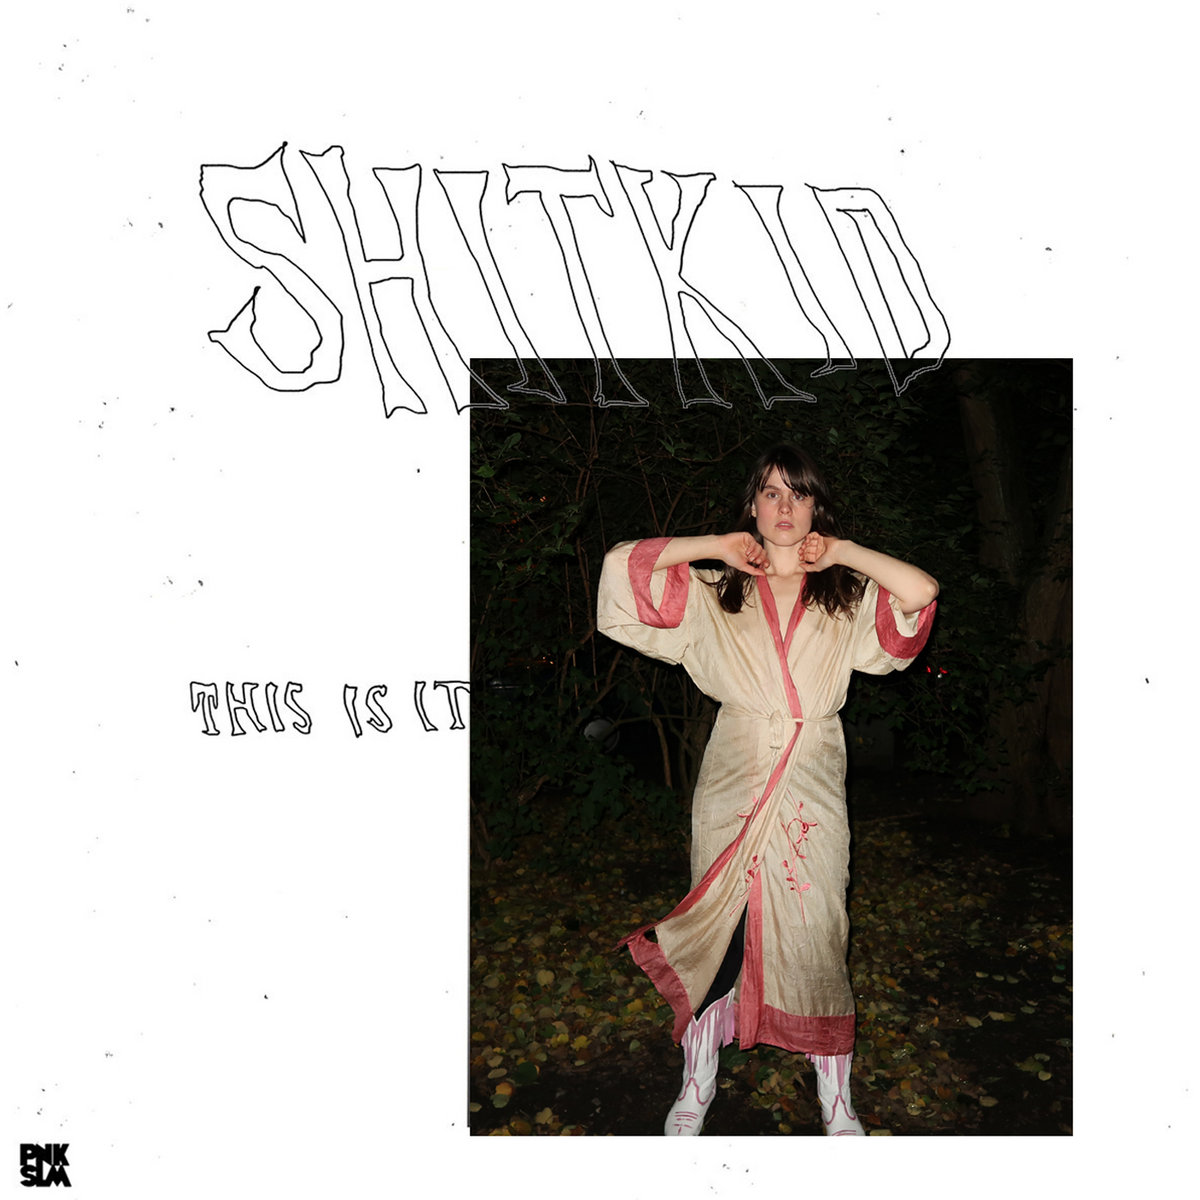 Shitkid---This-Is-It-EP-al-cover-12